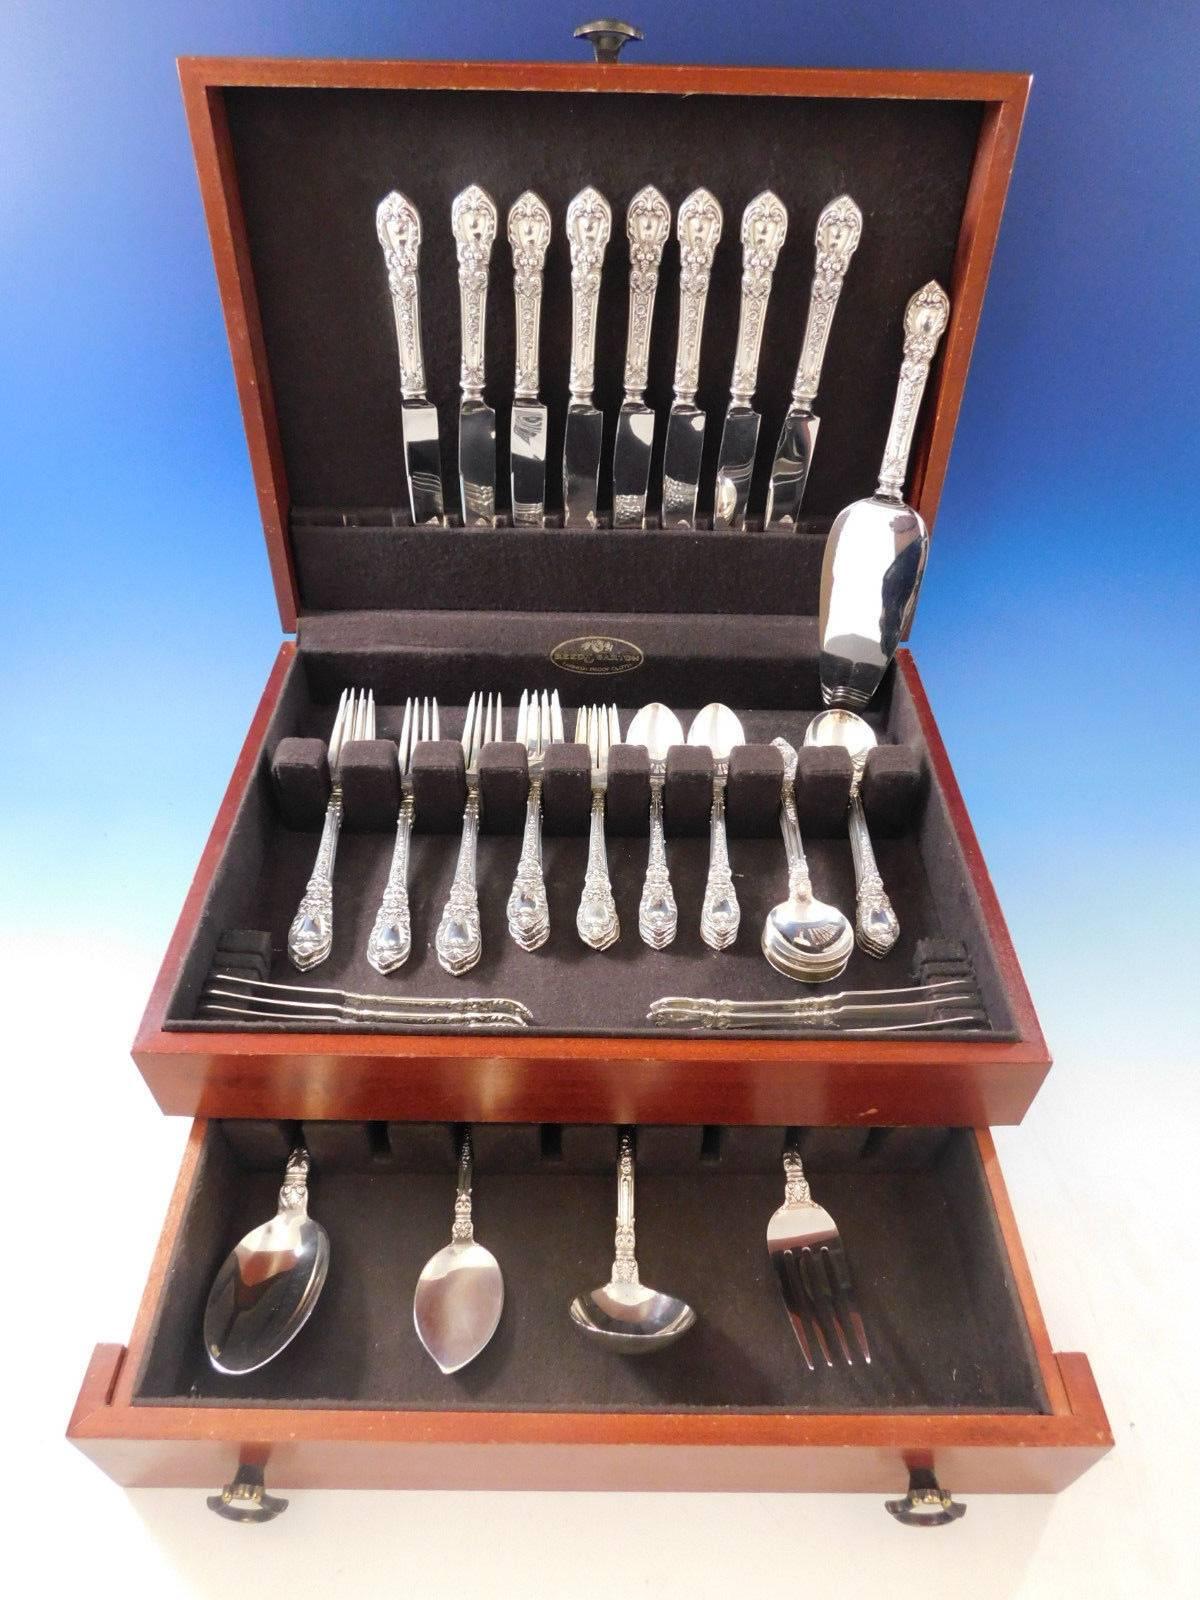 Exquisite Charles II by Lunt sterling silver flatware set - 54 pieces. This set includes:

Eight regular knives, 9 1/8